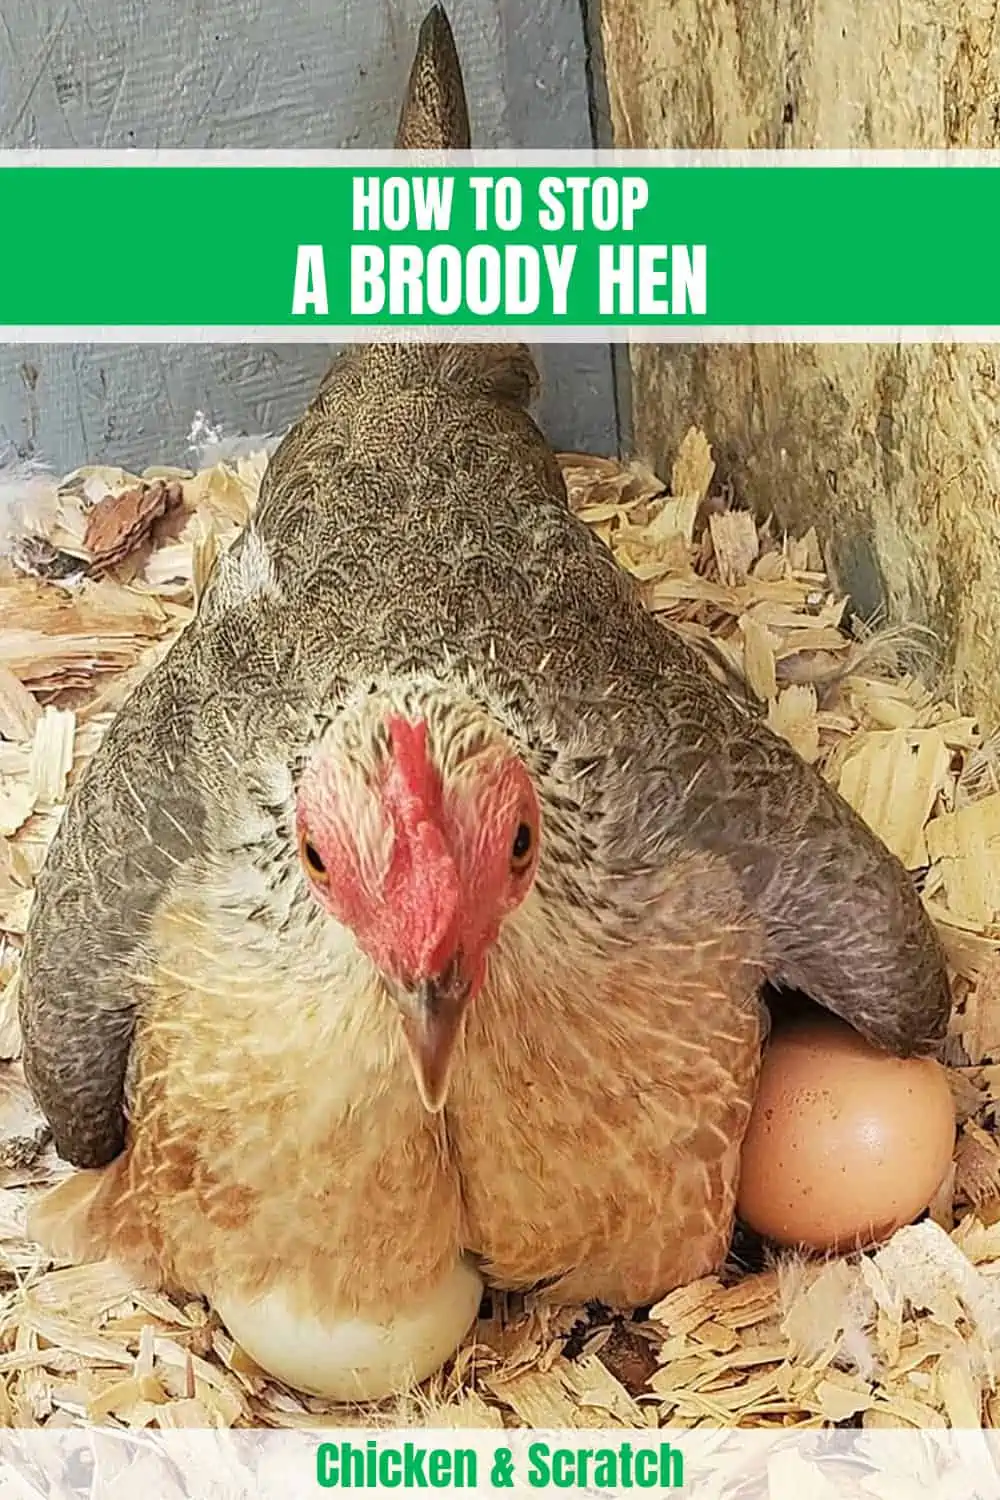 What's a Broody Hen